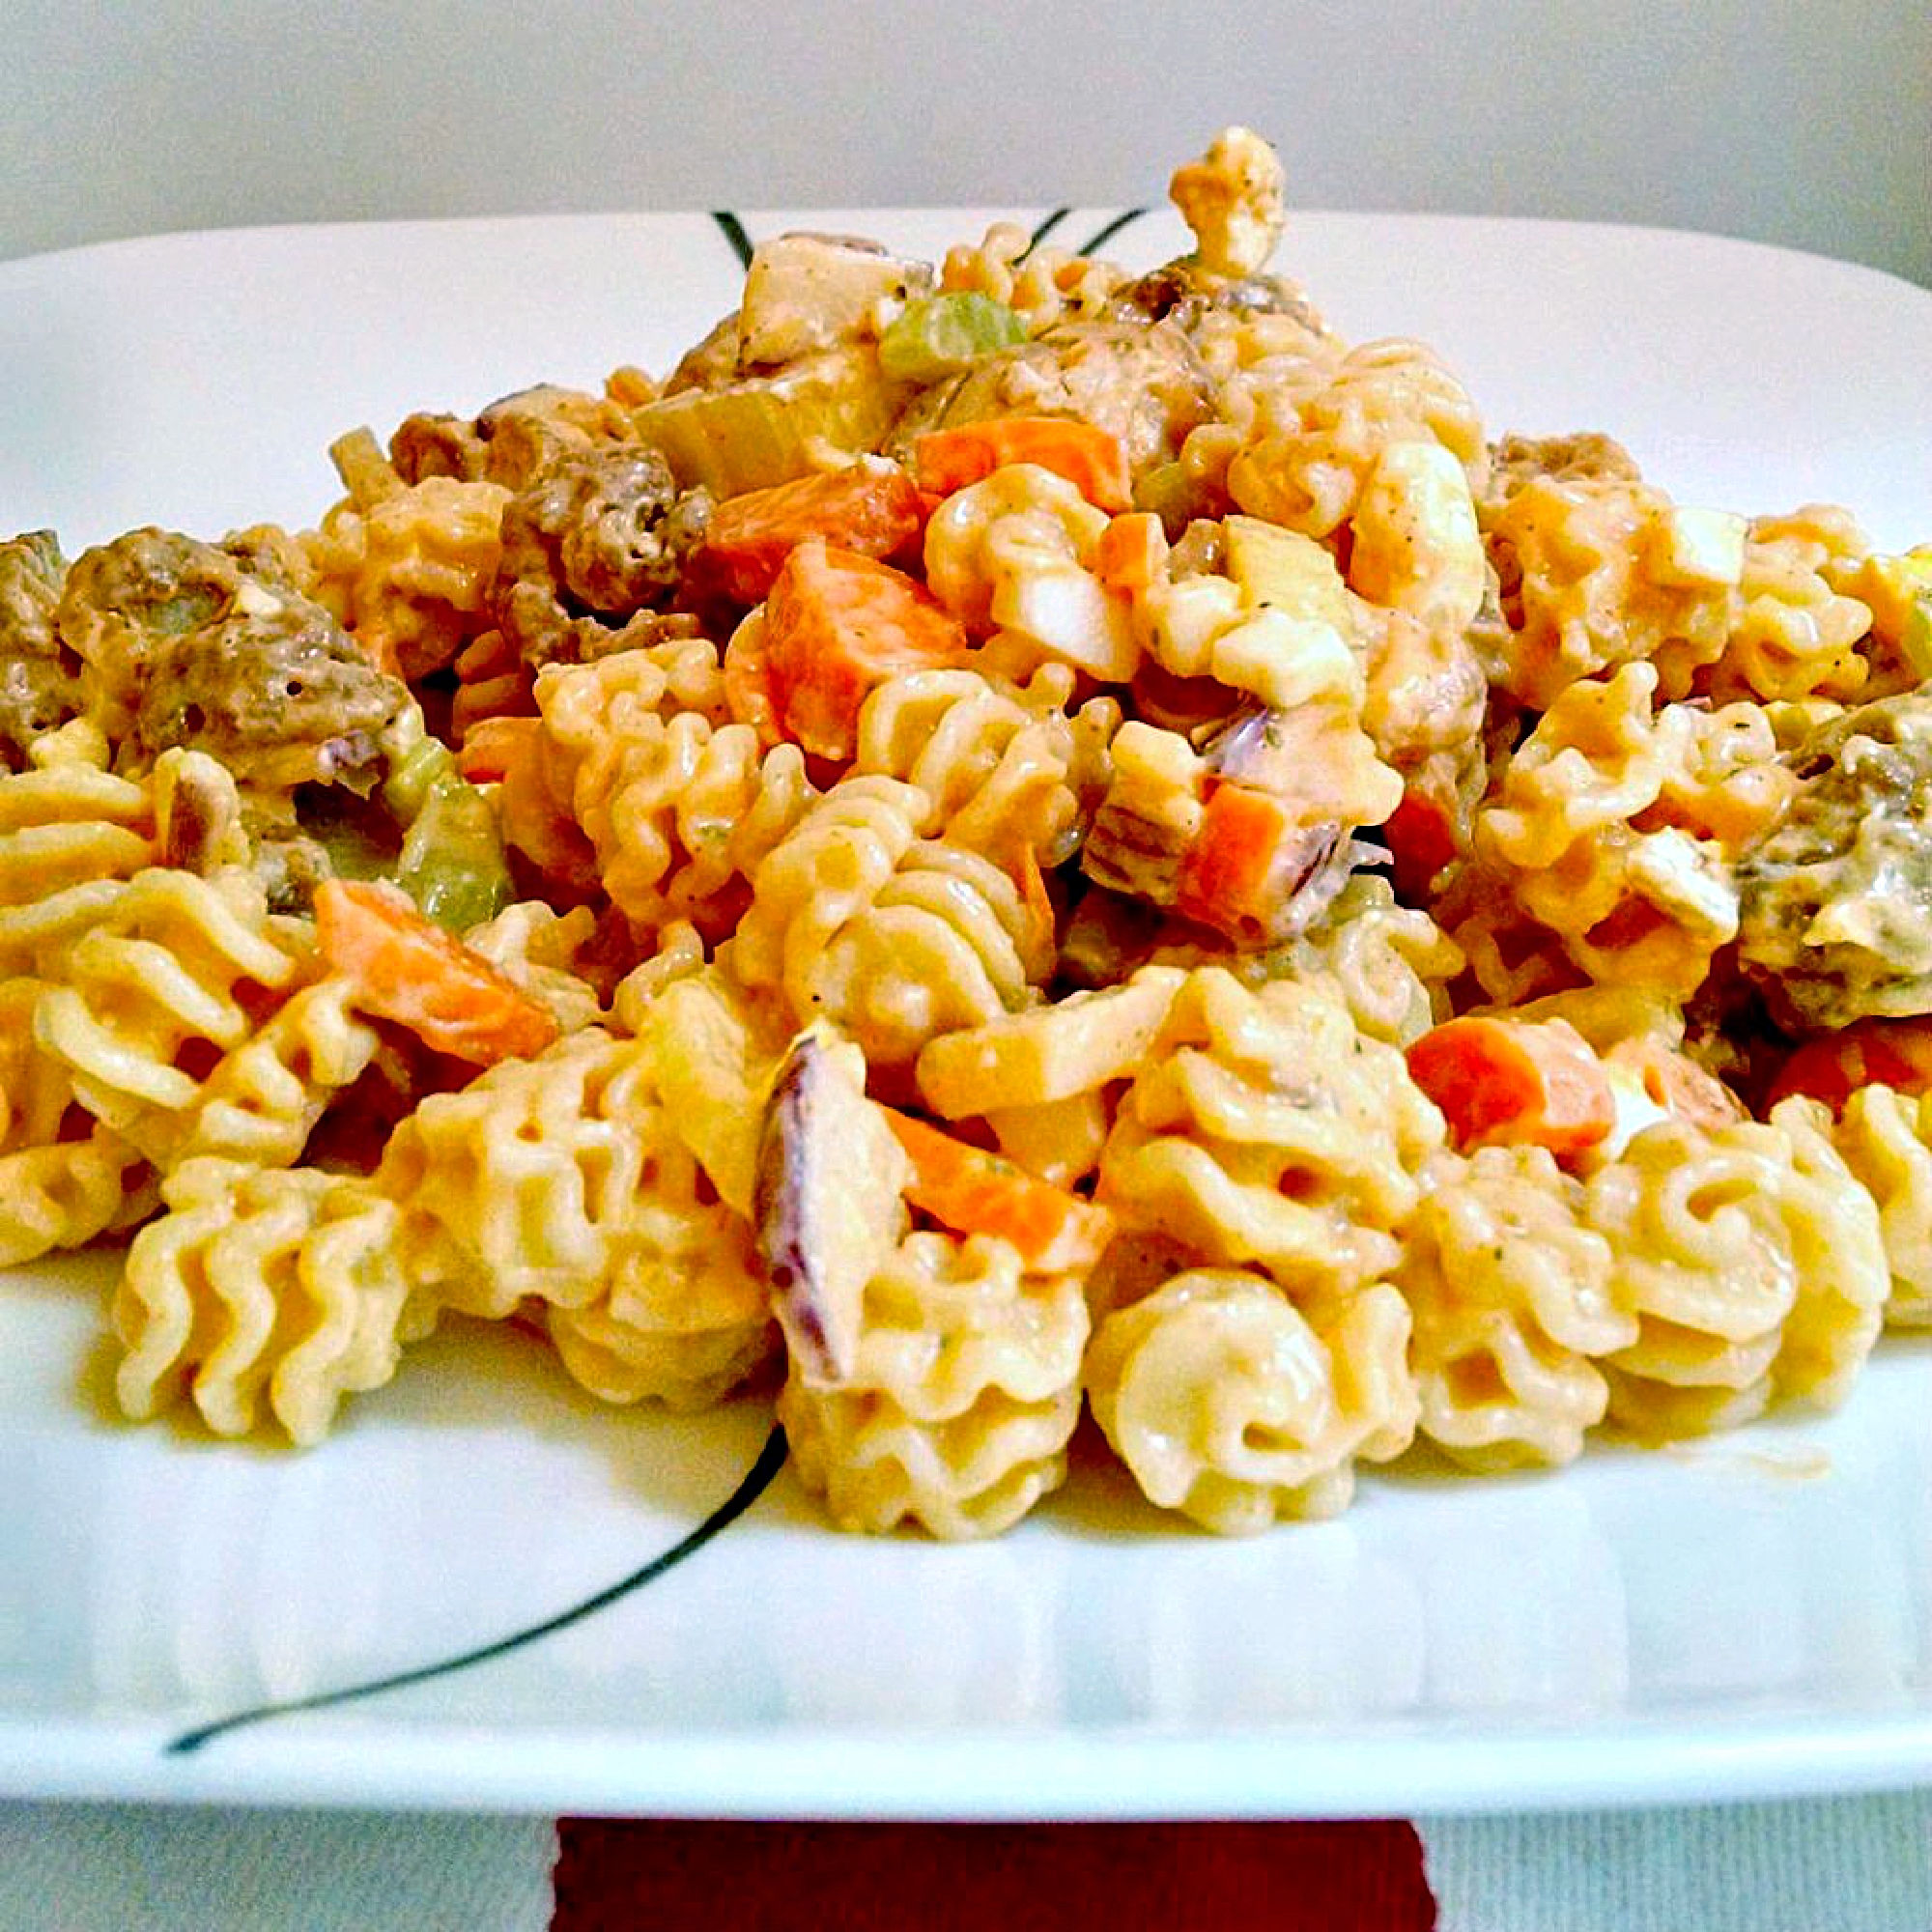 Buffalo Chicken Pasta Salad uses leftover buffalo chicken rotisserie chicken to make a deliciously quick and spicy weeknight dinner, but you could use any boneless and skinless chicken you have available. #OurFamilyTable